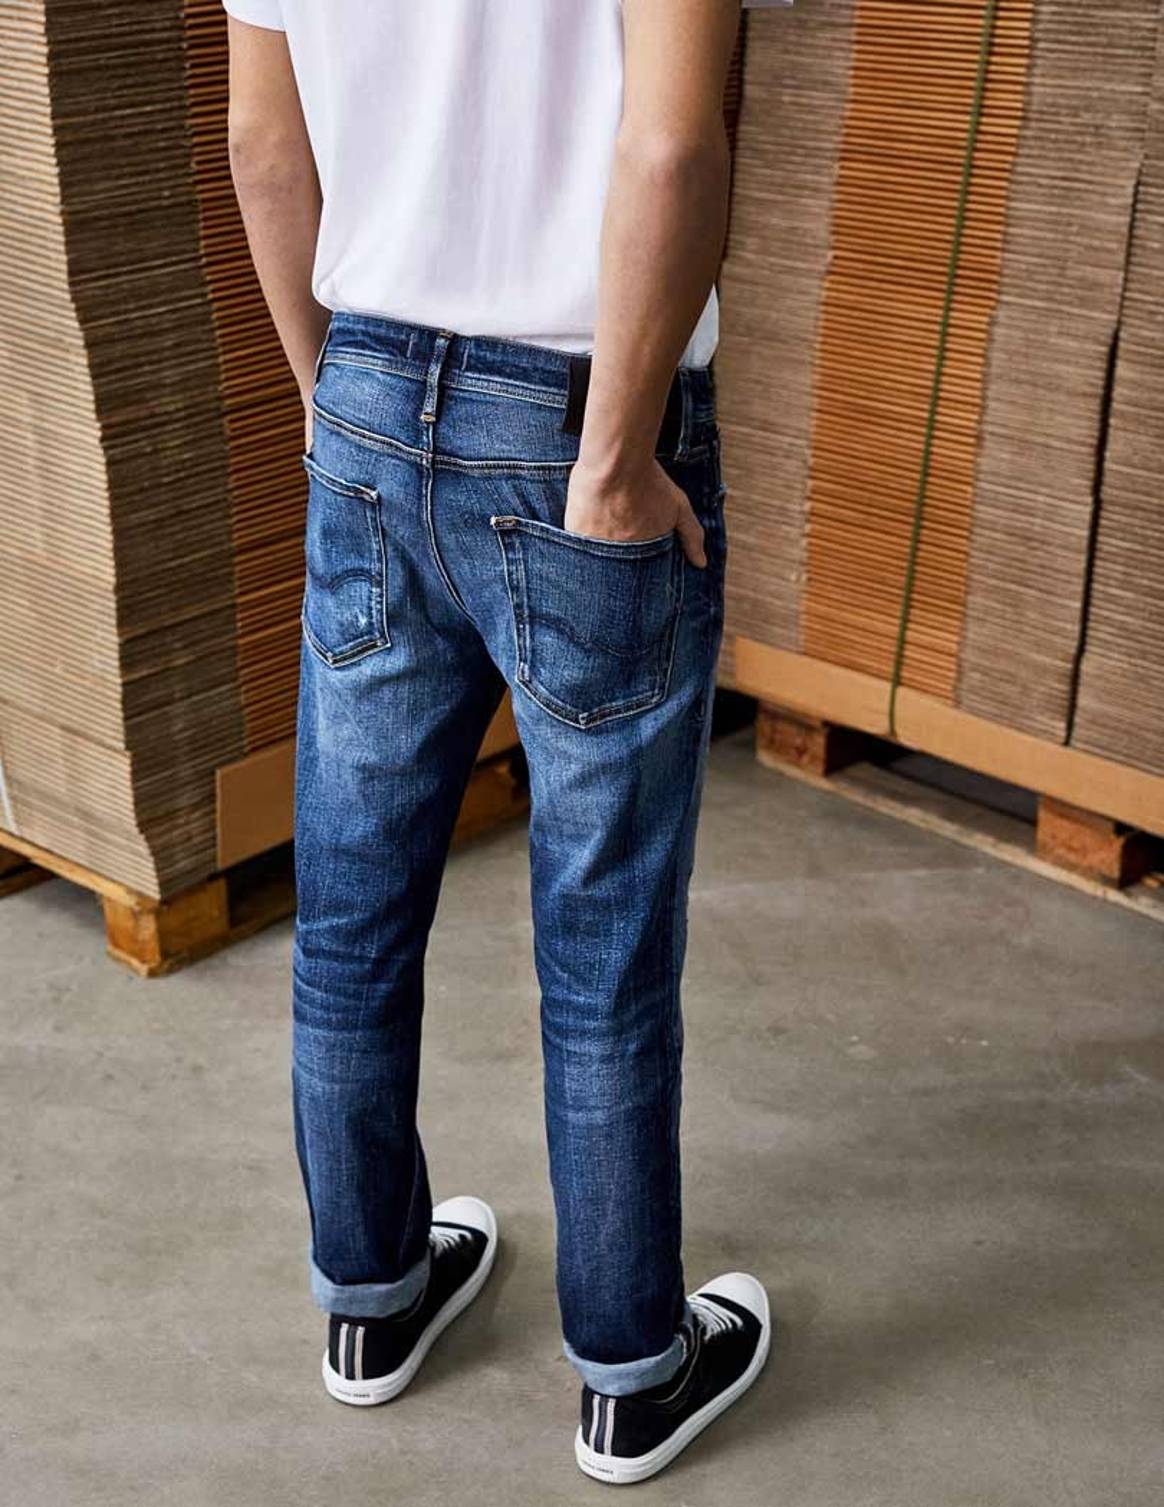 Jack & Jones to launch most sustainable jeans to date